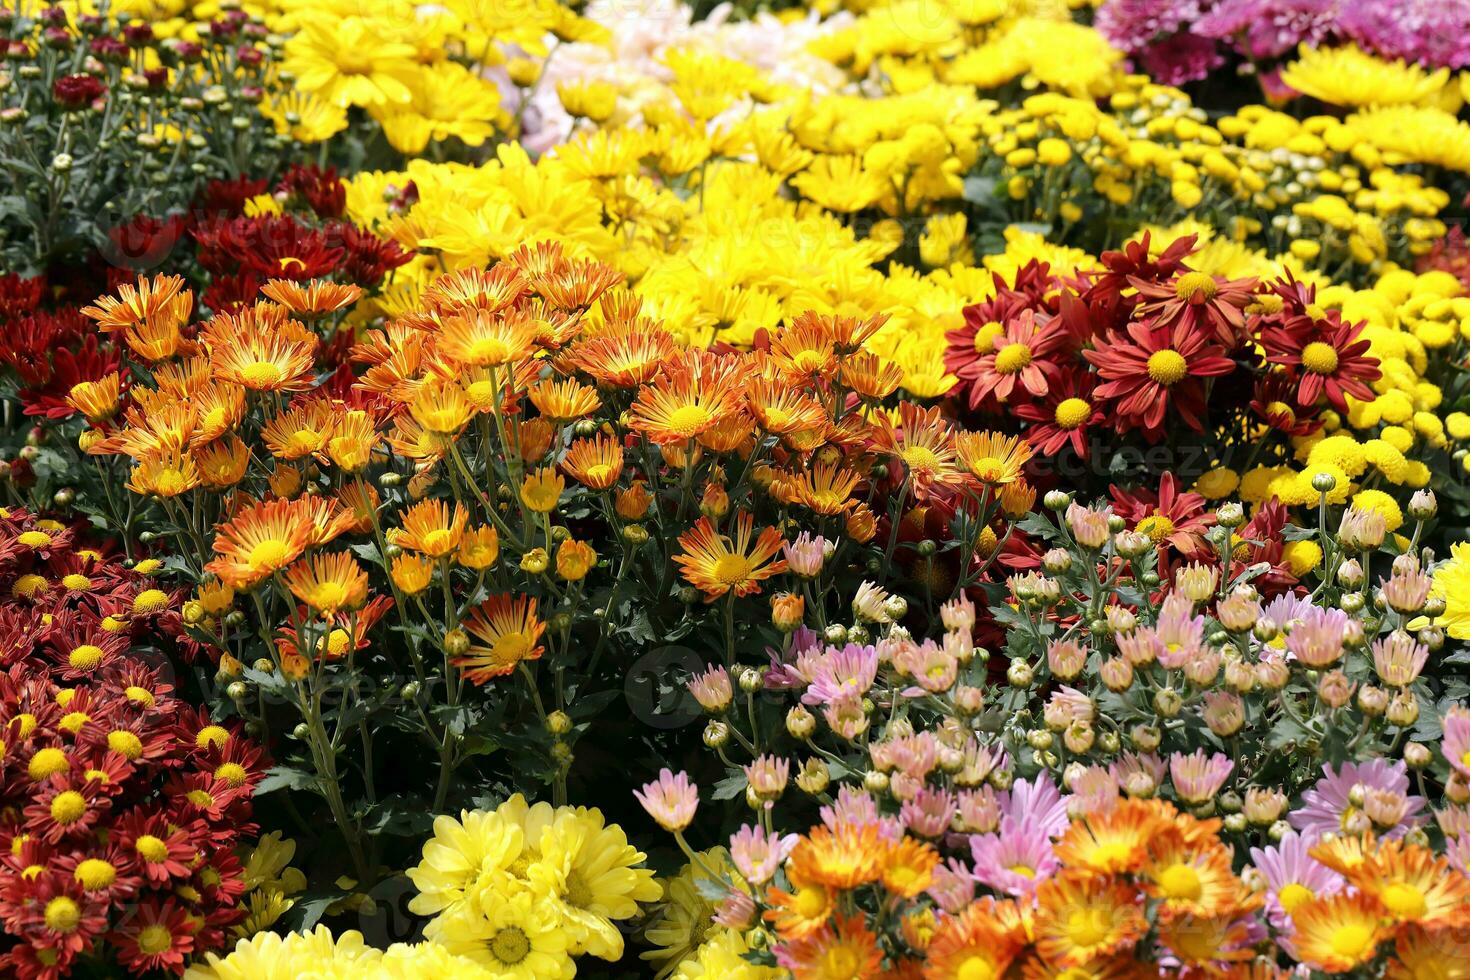 Colorful flower bed orange red yellow outdoor garden daylight photo